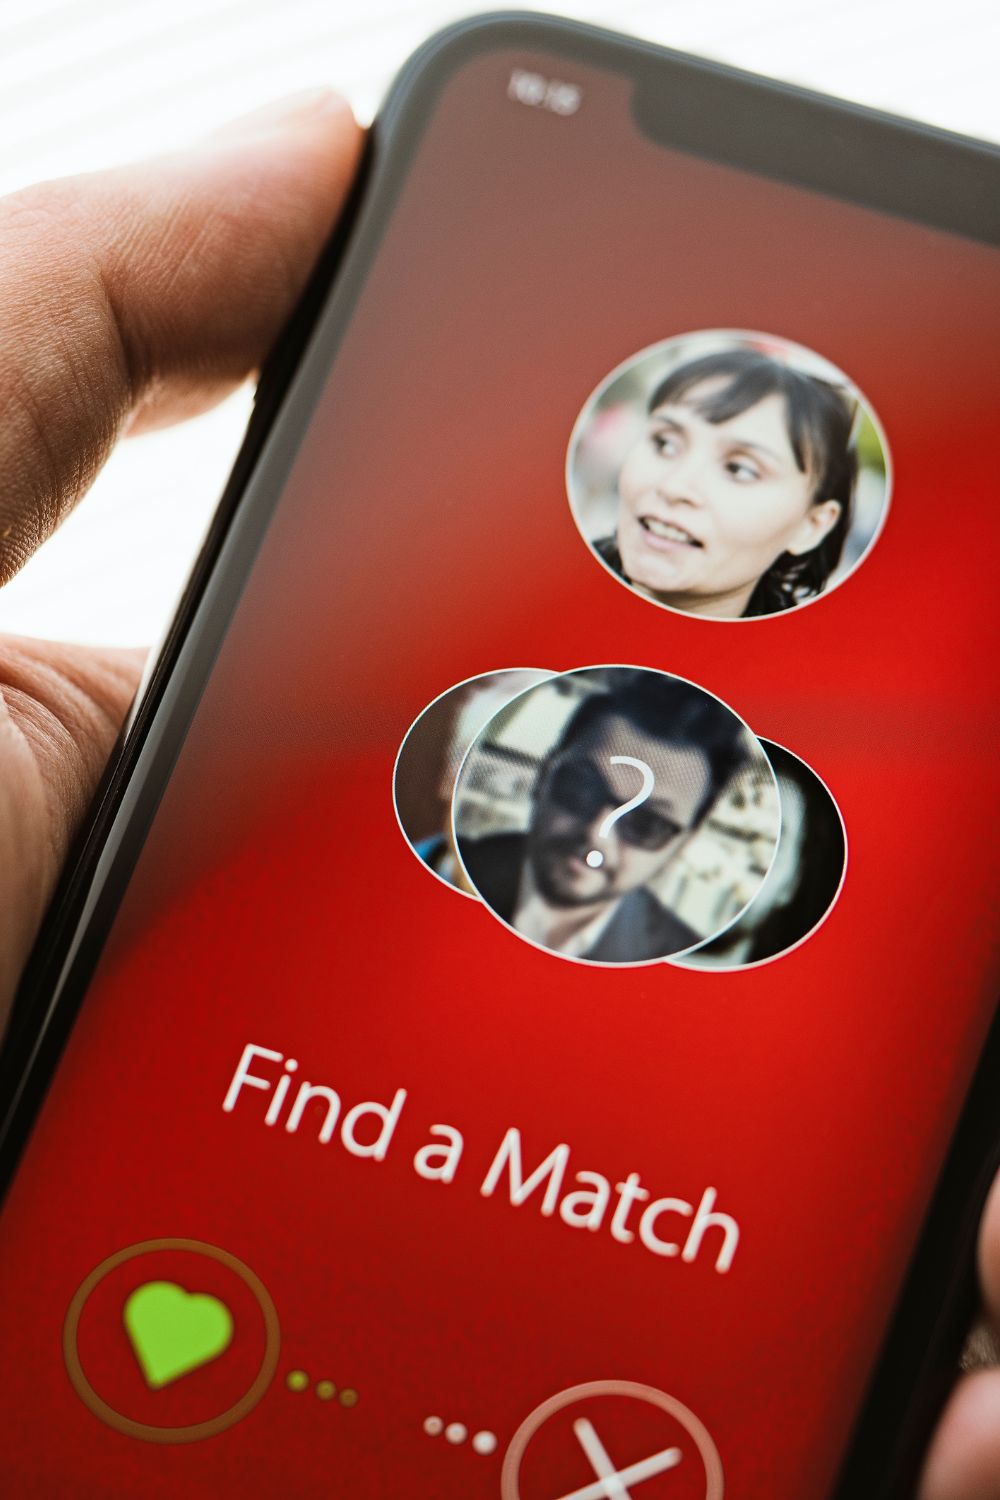 Tinder Addiction is Real! 16 Signs You Are Addicted To Tinder